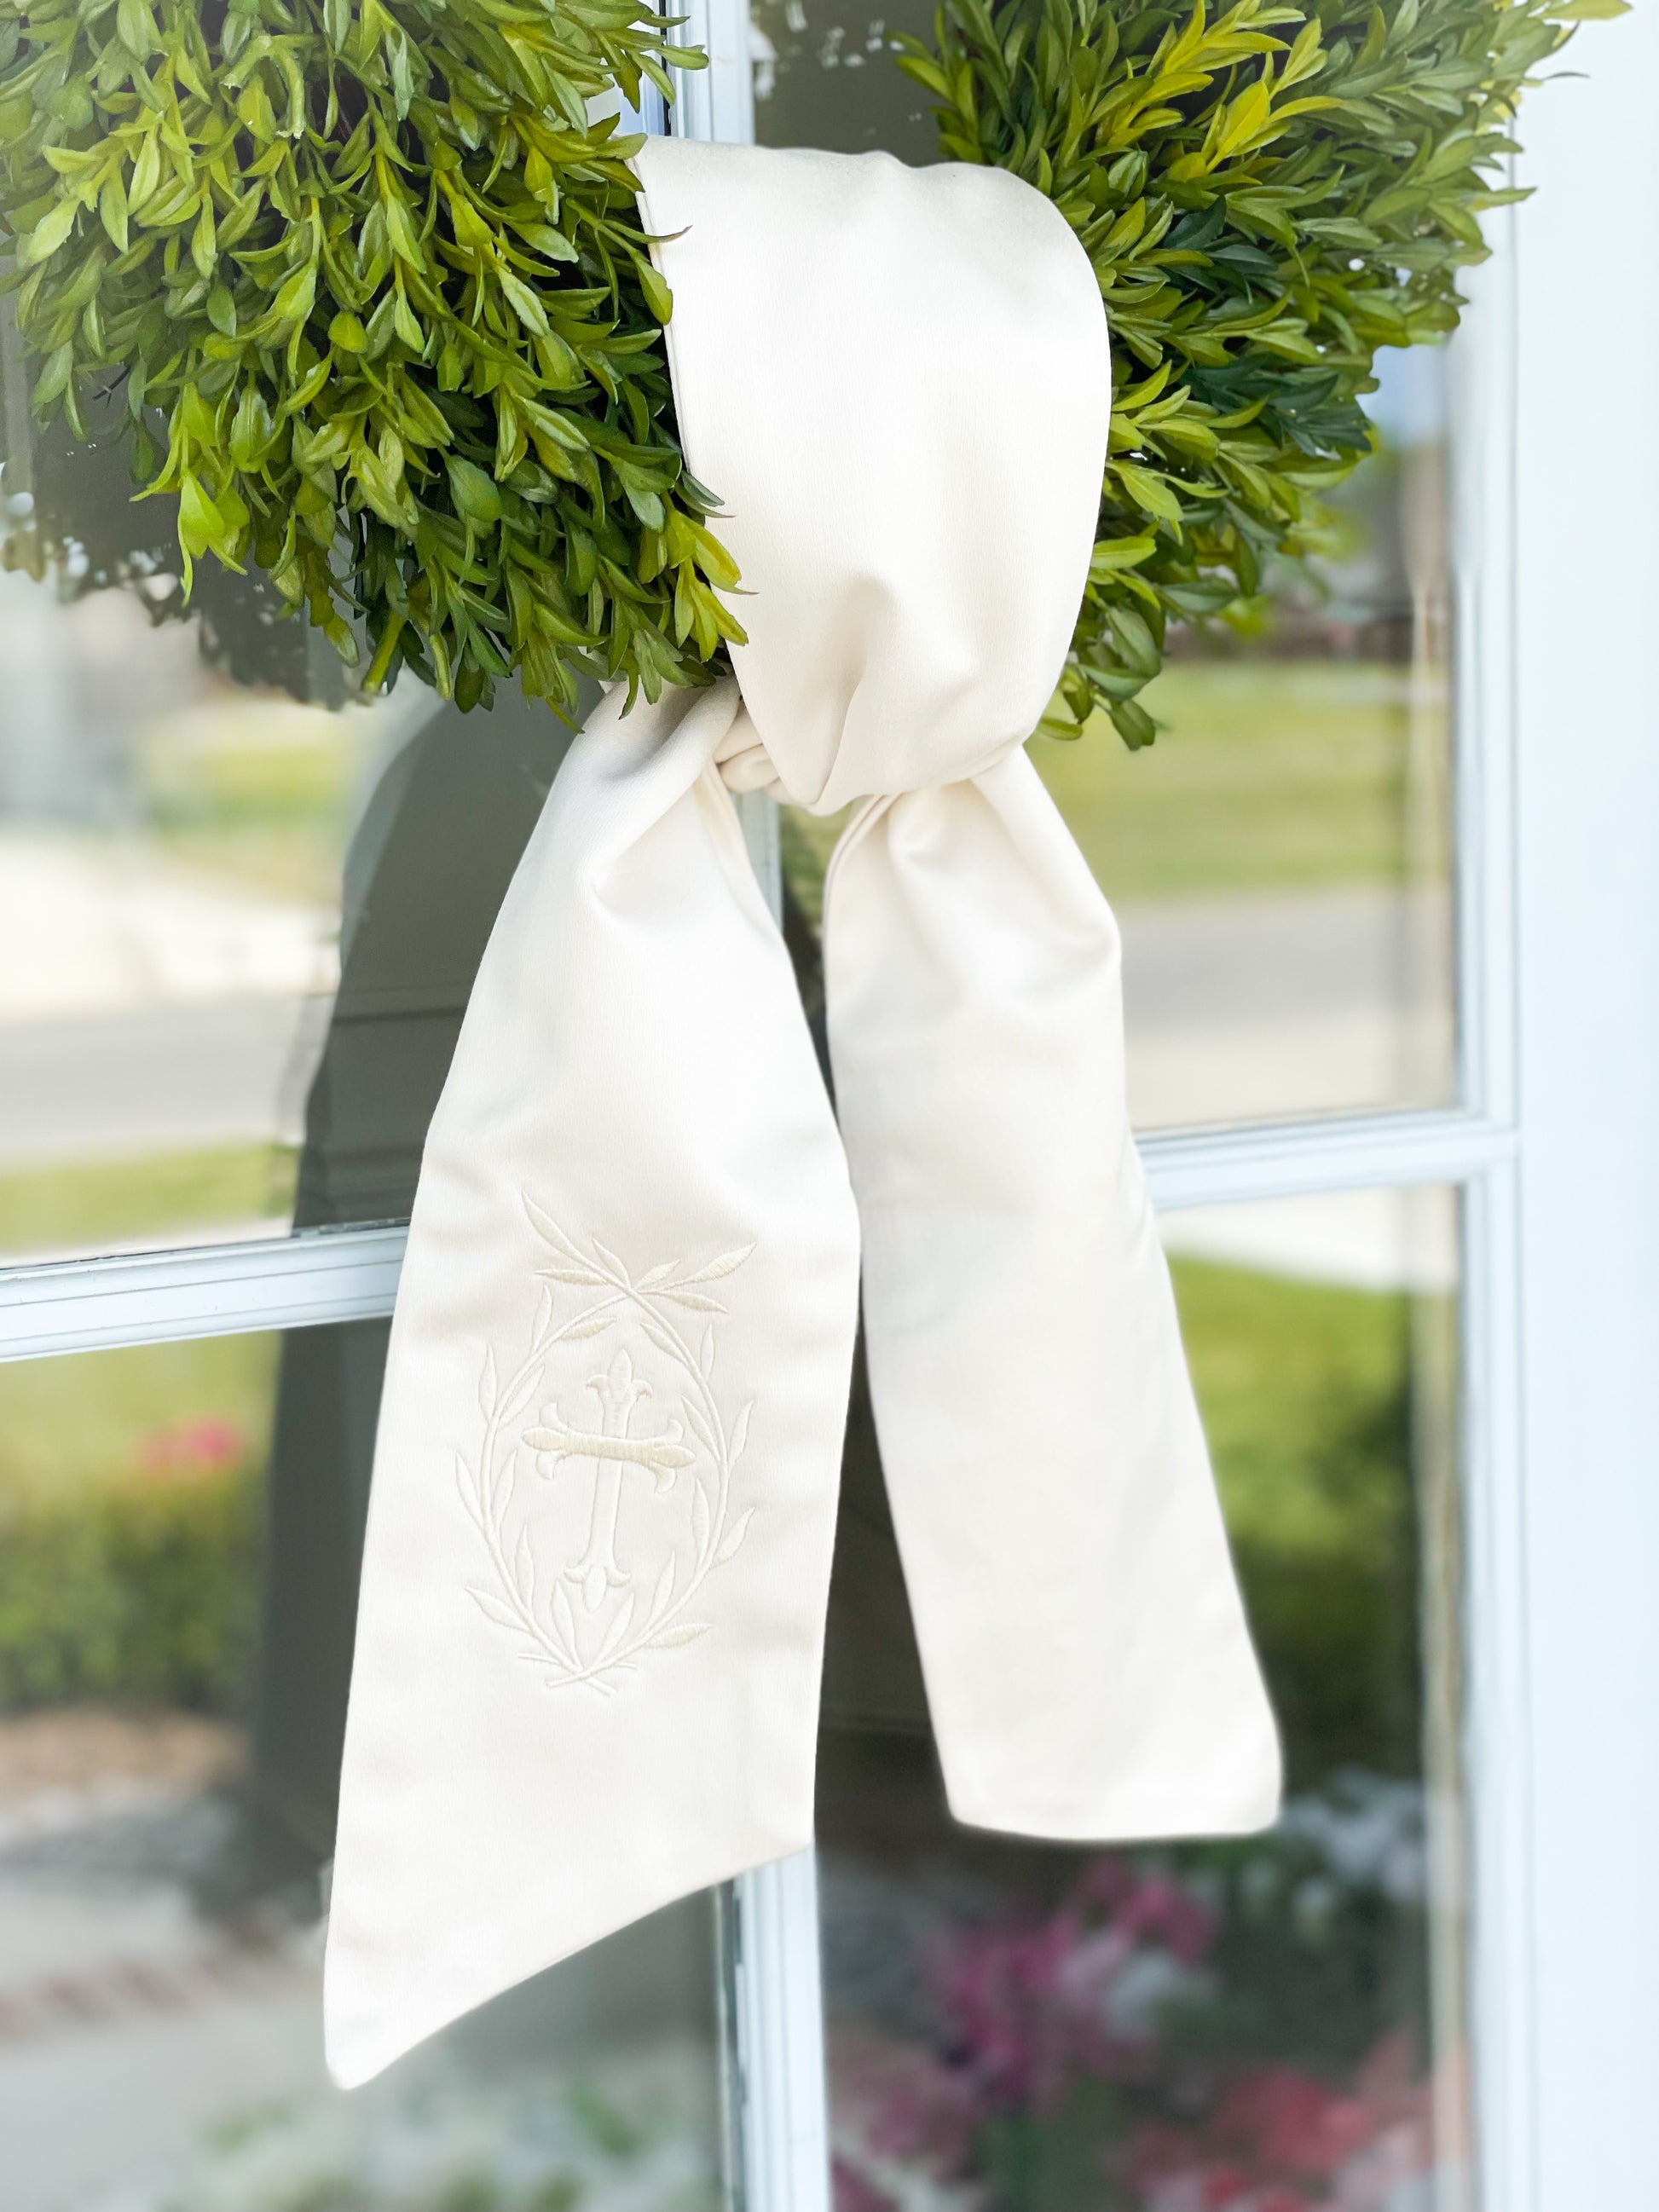 Wreath Sash for Front Door Decor - Blank White Wreath Sash for Embroidery  Monogram - Wreath Accessories - Polyester - 4.5 W x 56 L